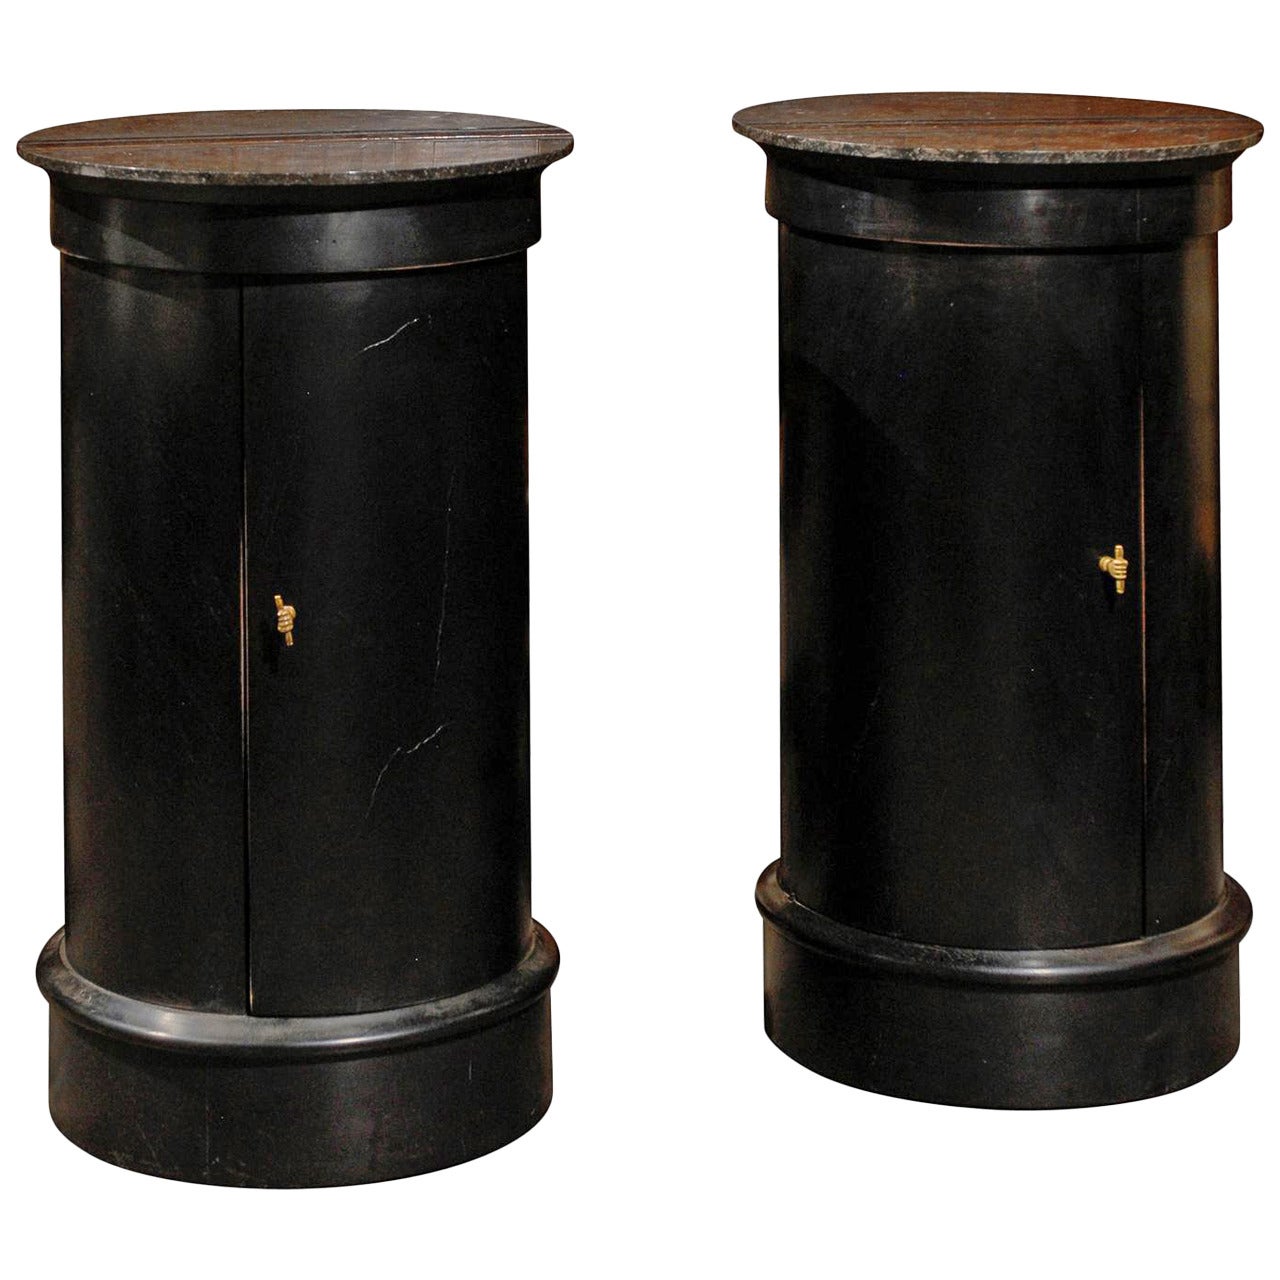 Pair of French Early 20th Century Ebonized Wood Column Tables with Marble Tops